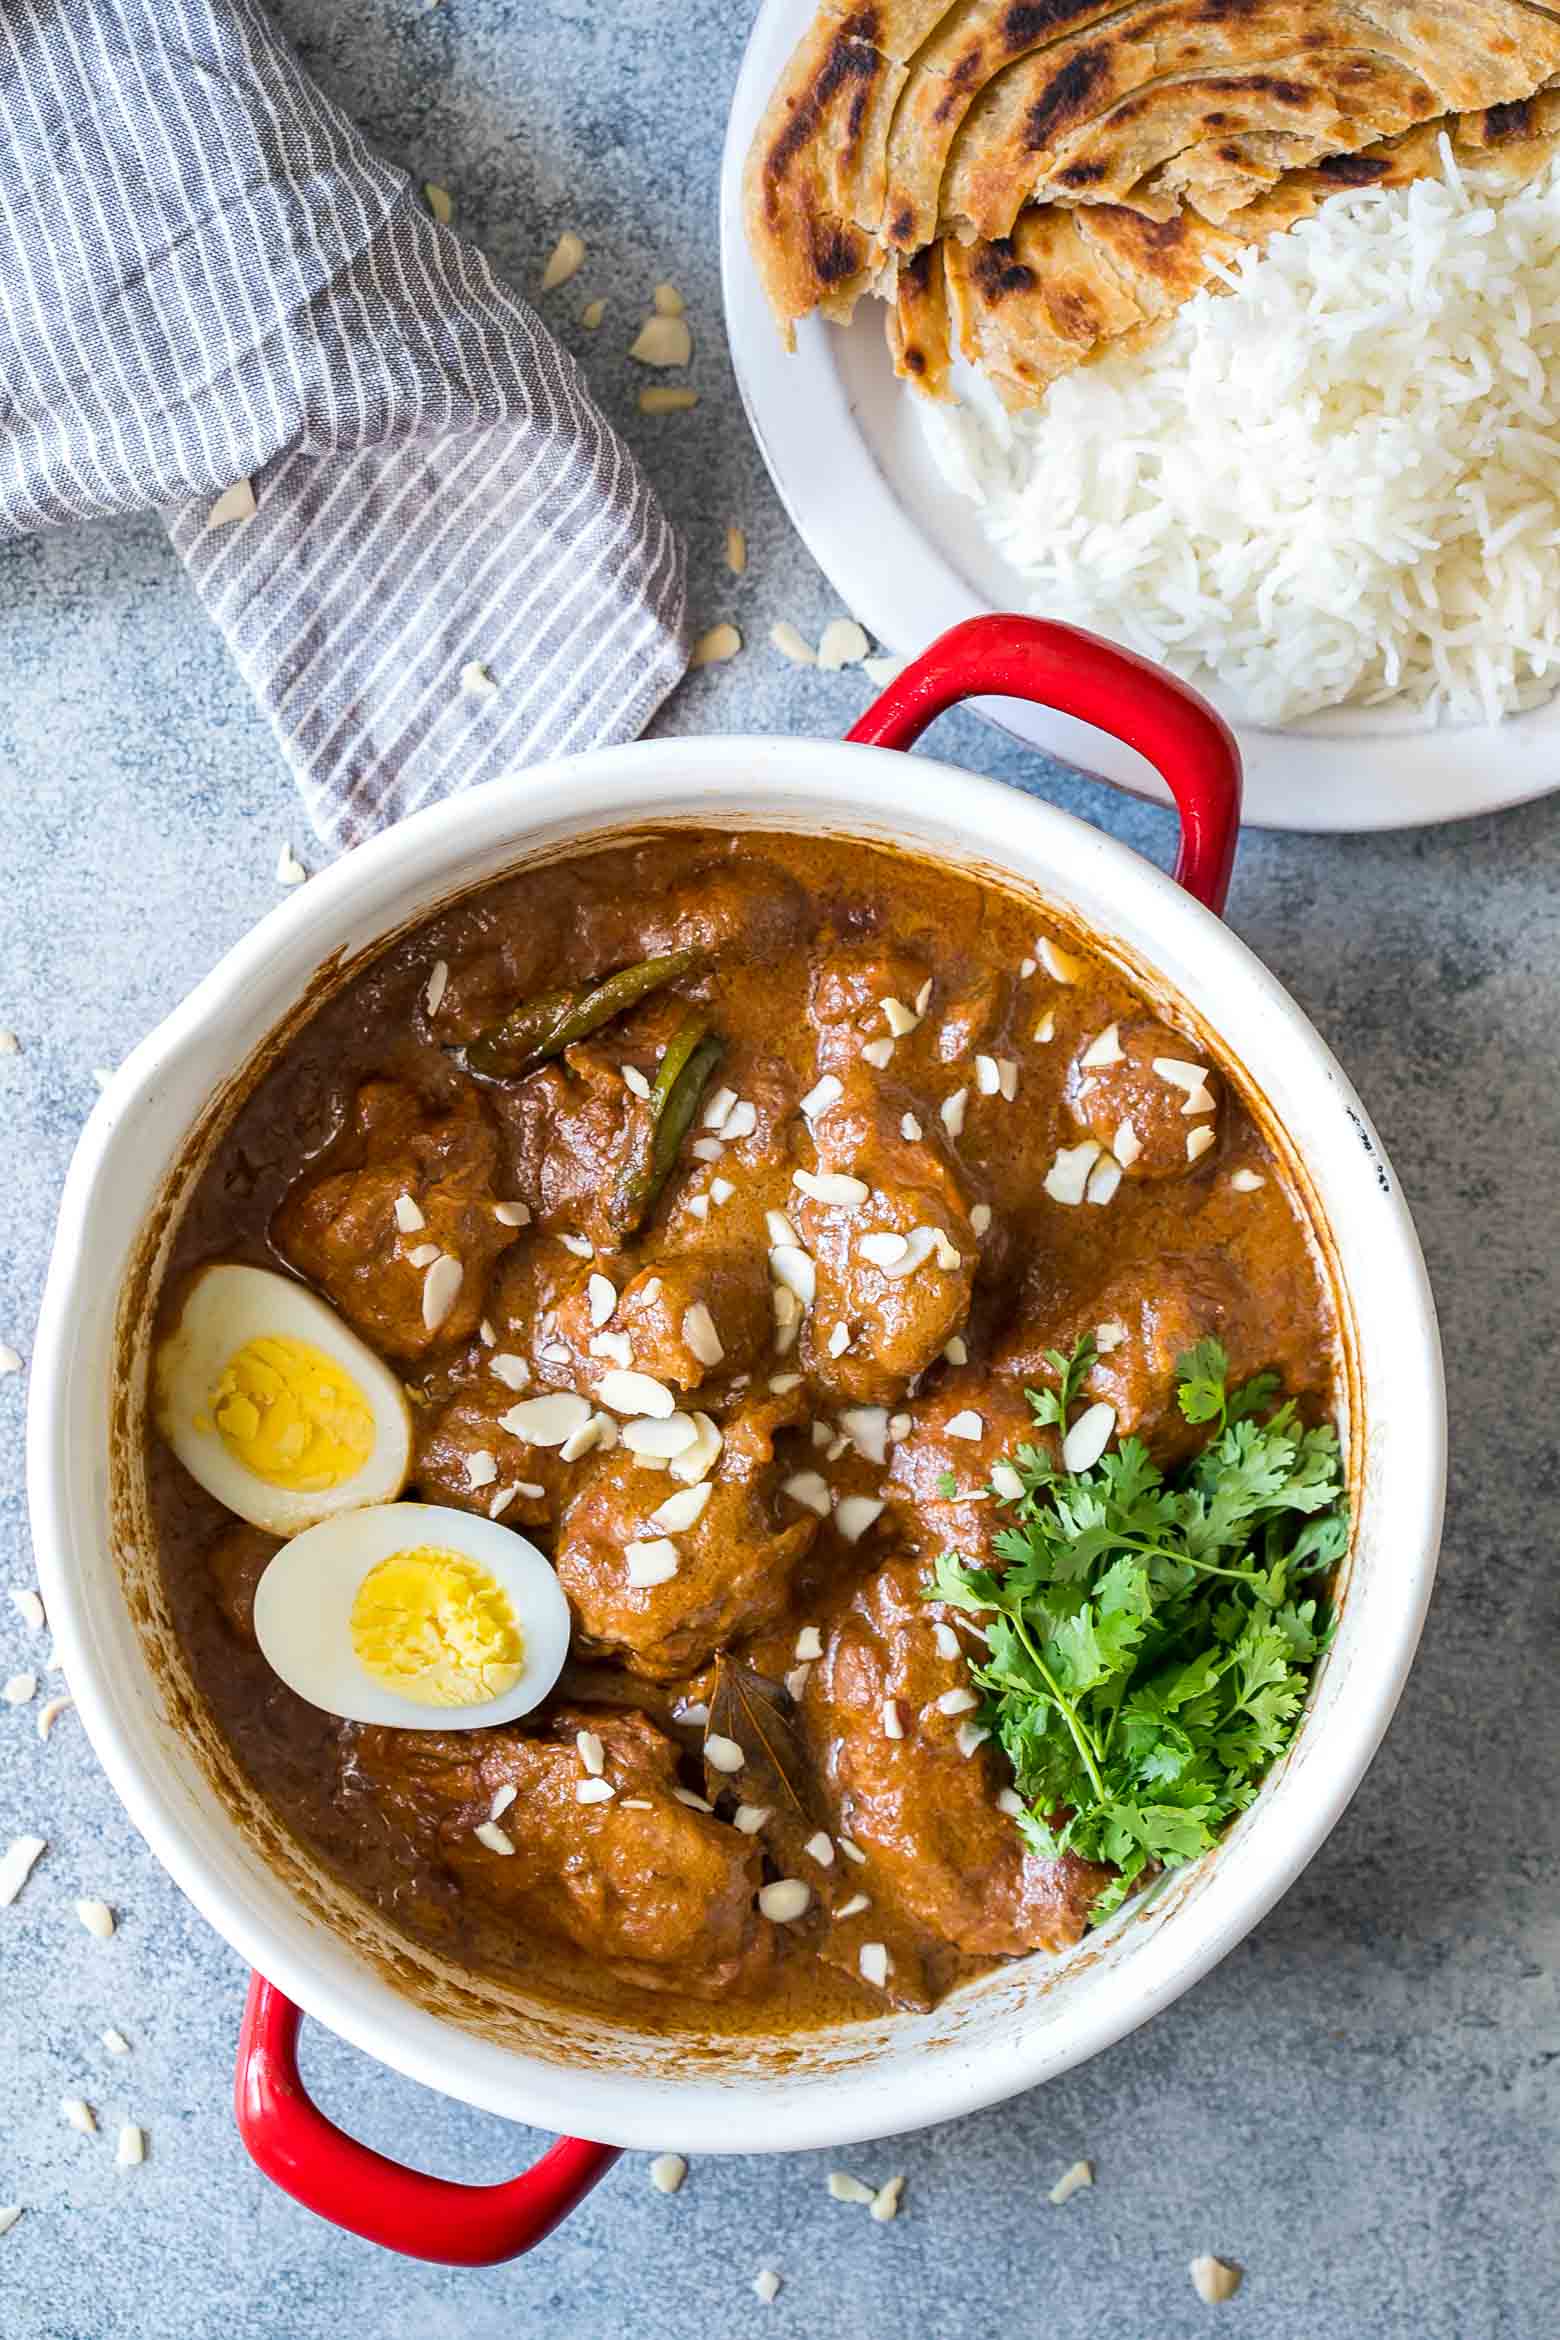 Mughlai Chicken is a restaurant style, north Indian recipe with a creamy, dark brown onion gravy that will have you licking the plate! Serve it with parathas, biryani or jeera rice, and feel free to substitute paneer if you are vegetarian.